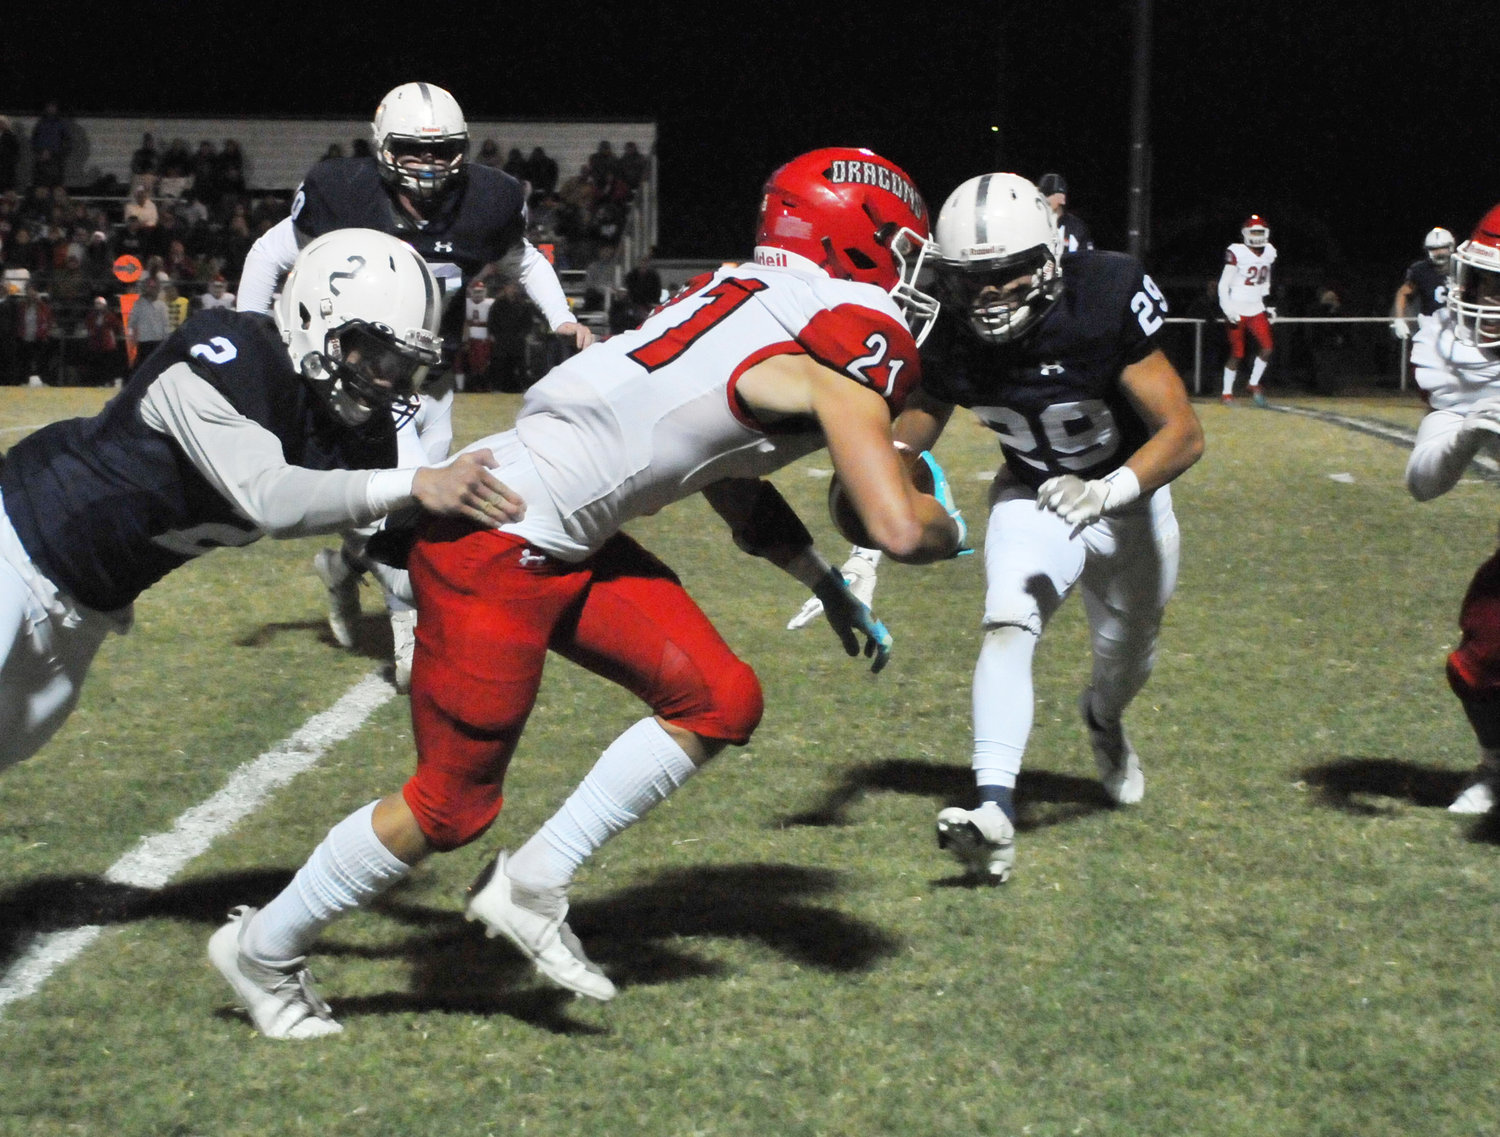 Purcell senior Titus Mason fights for yardage against Marlow. Purcell’s season ended after a 63-20 defeat by the Outlaws.